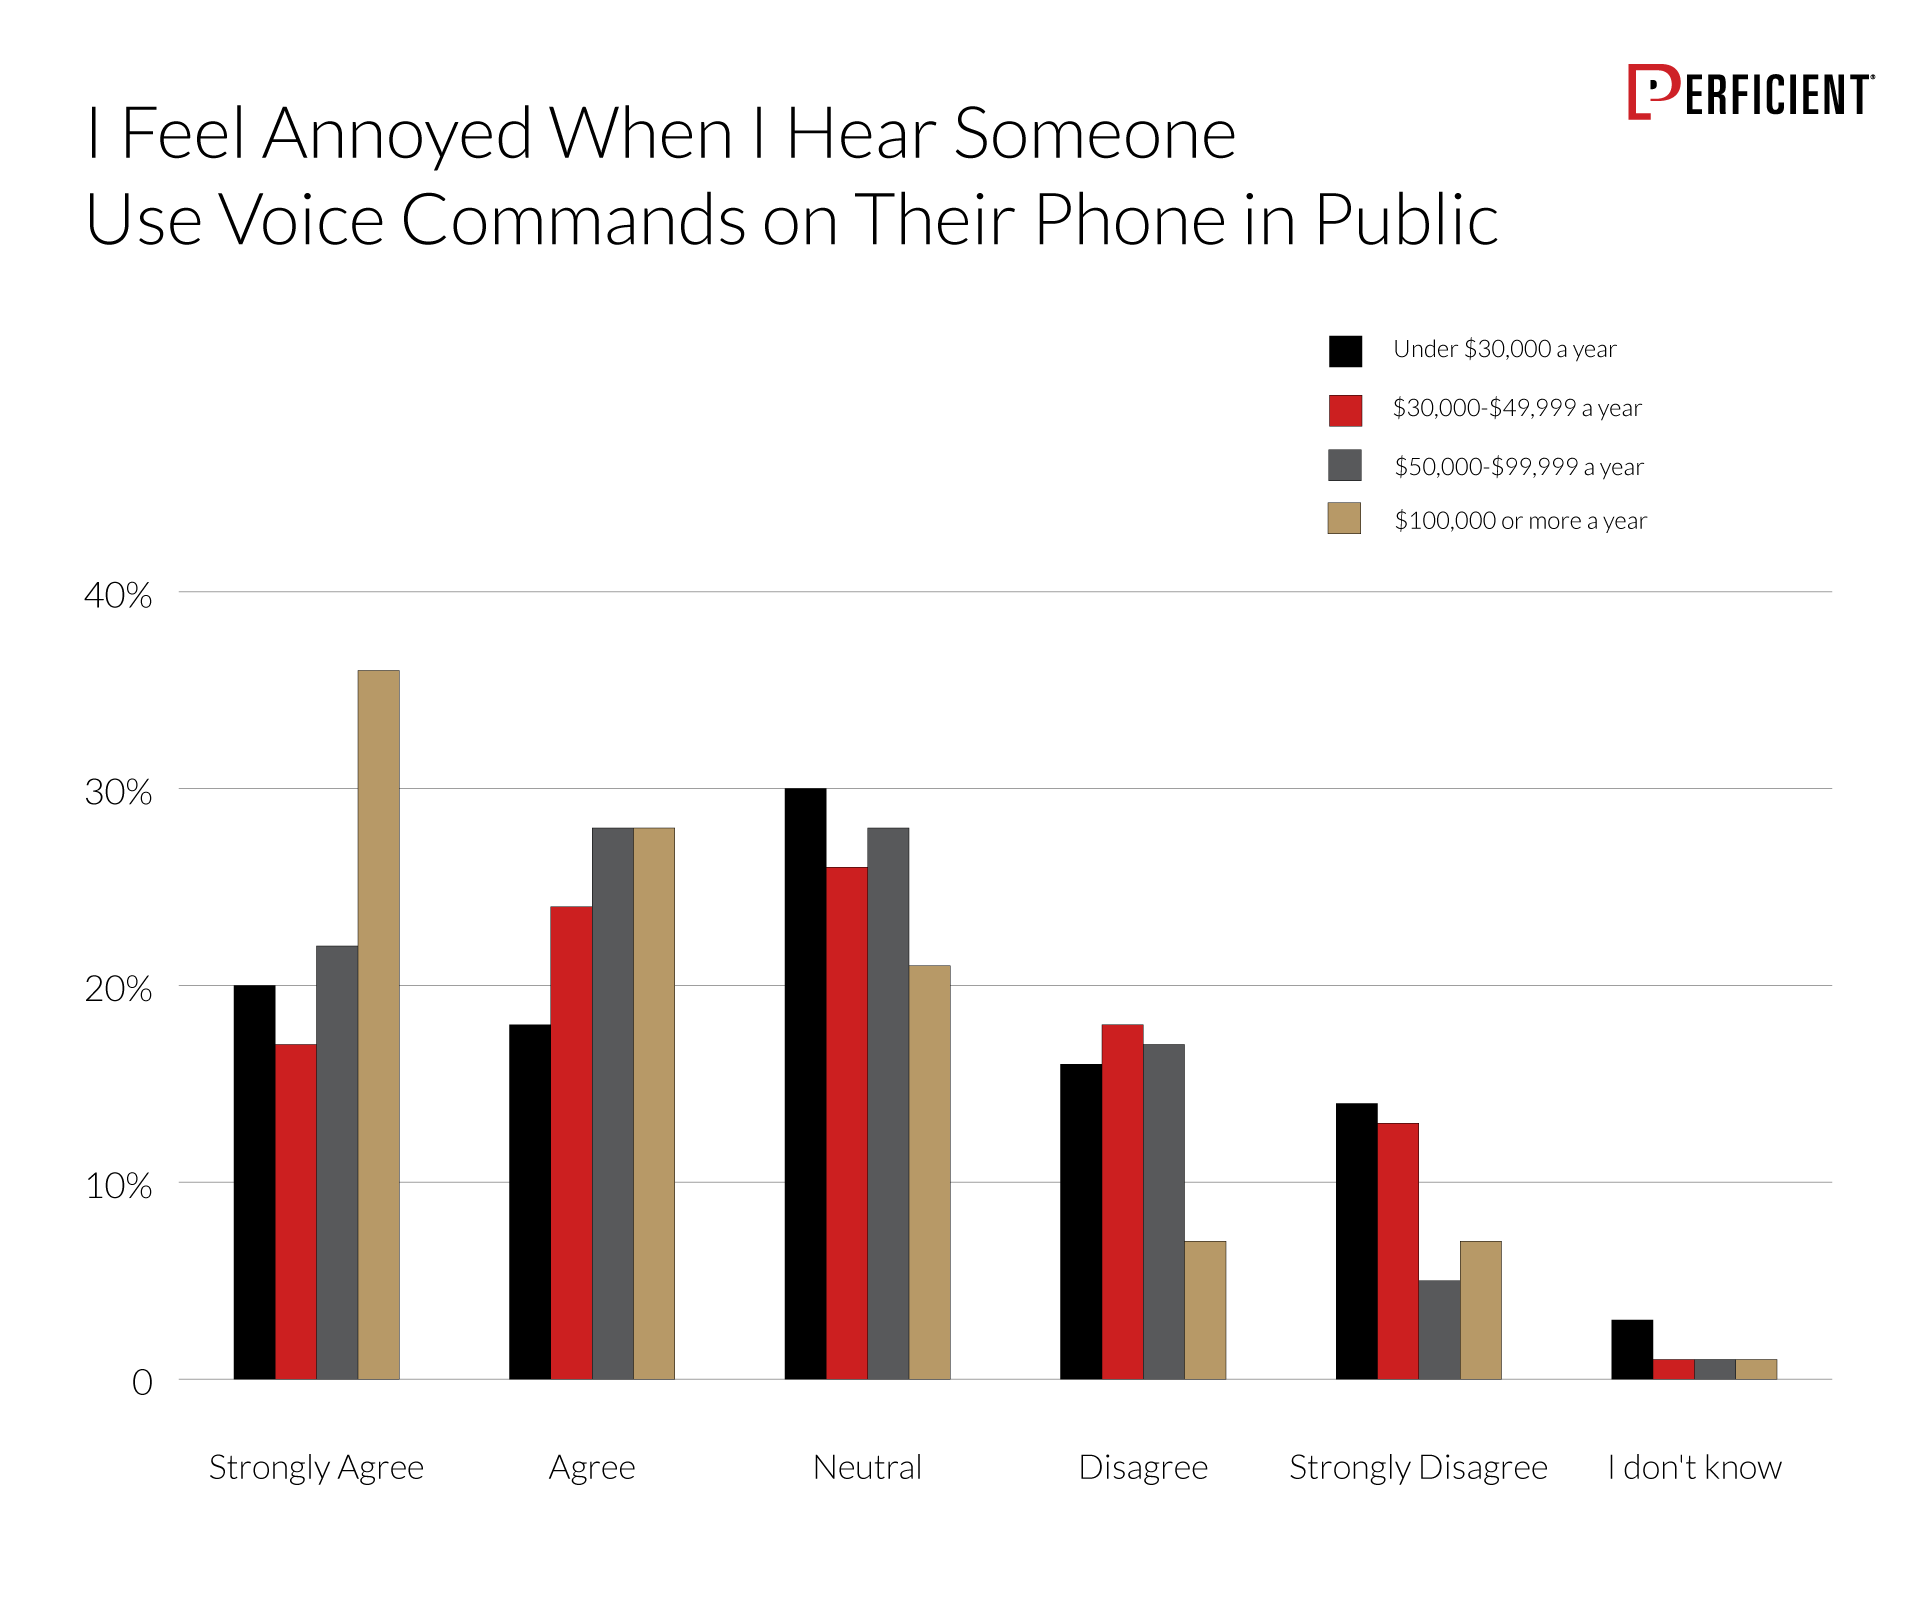 Chart shows if users agree that they feel annoyed when they hear someone use voice commands on their phone in a public setting by their income